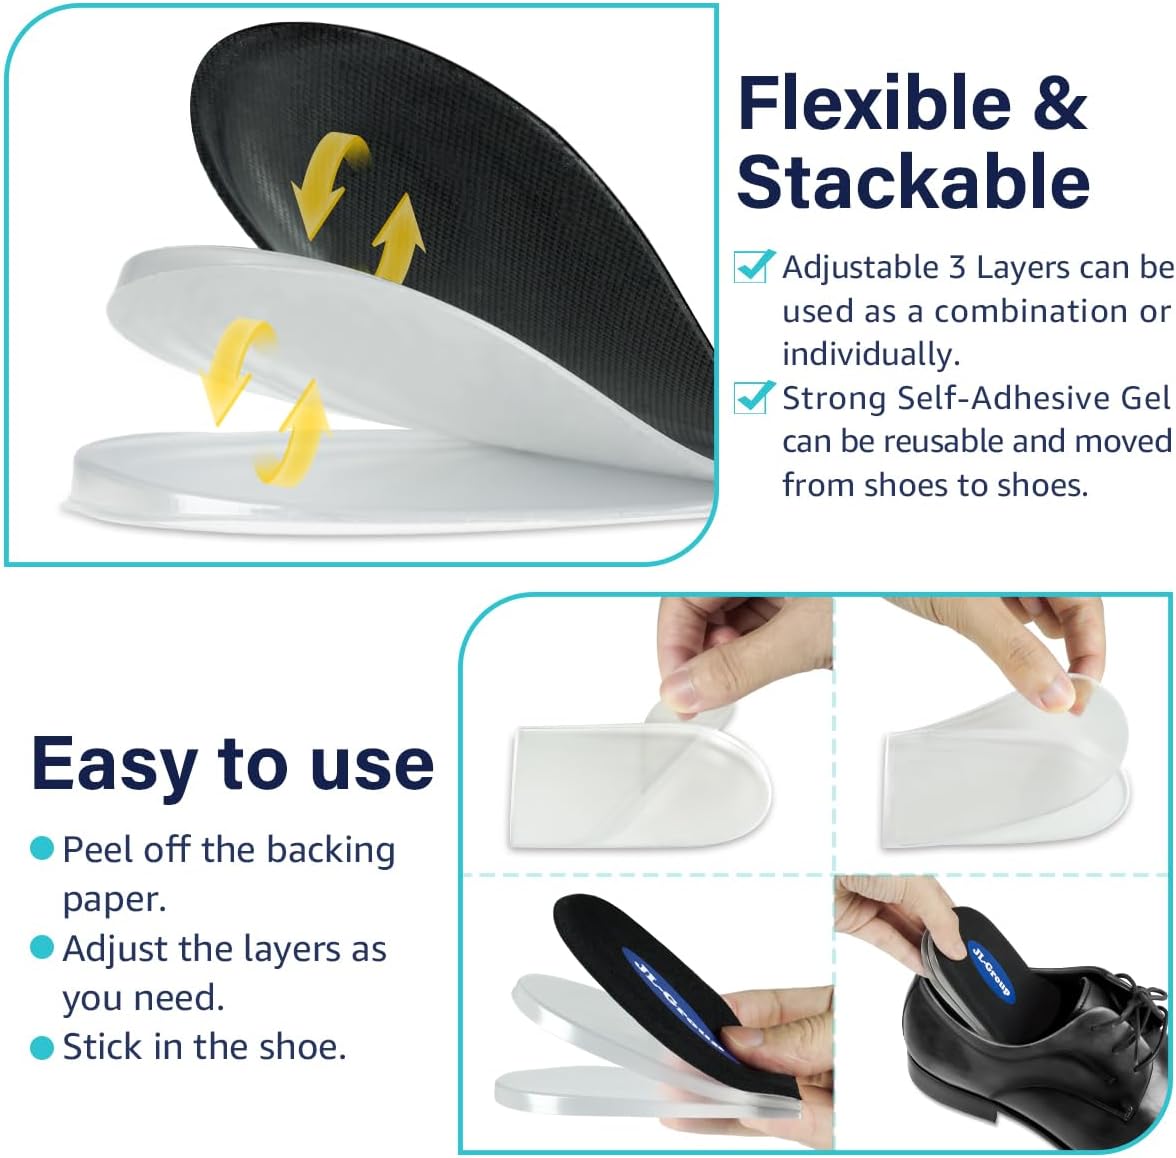 3 Layer Heel Wedge Inserts for Supination  Over Pronation, Microfabric Adjustable Corrective Insoles for Ankel Sprains, Bow Legs, Foot Alignment, Knee Pain (Large, Black)